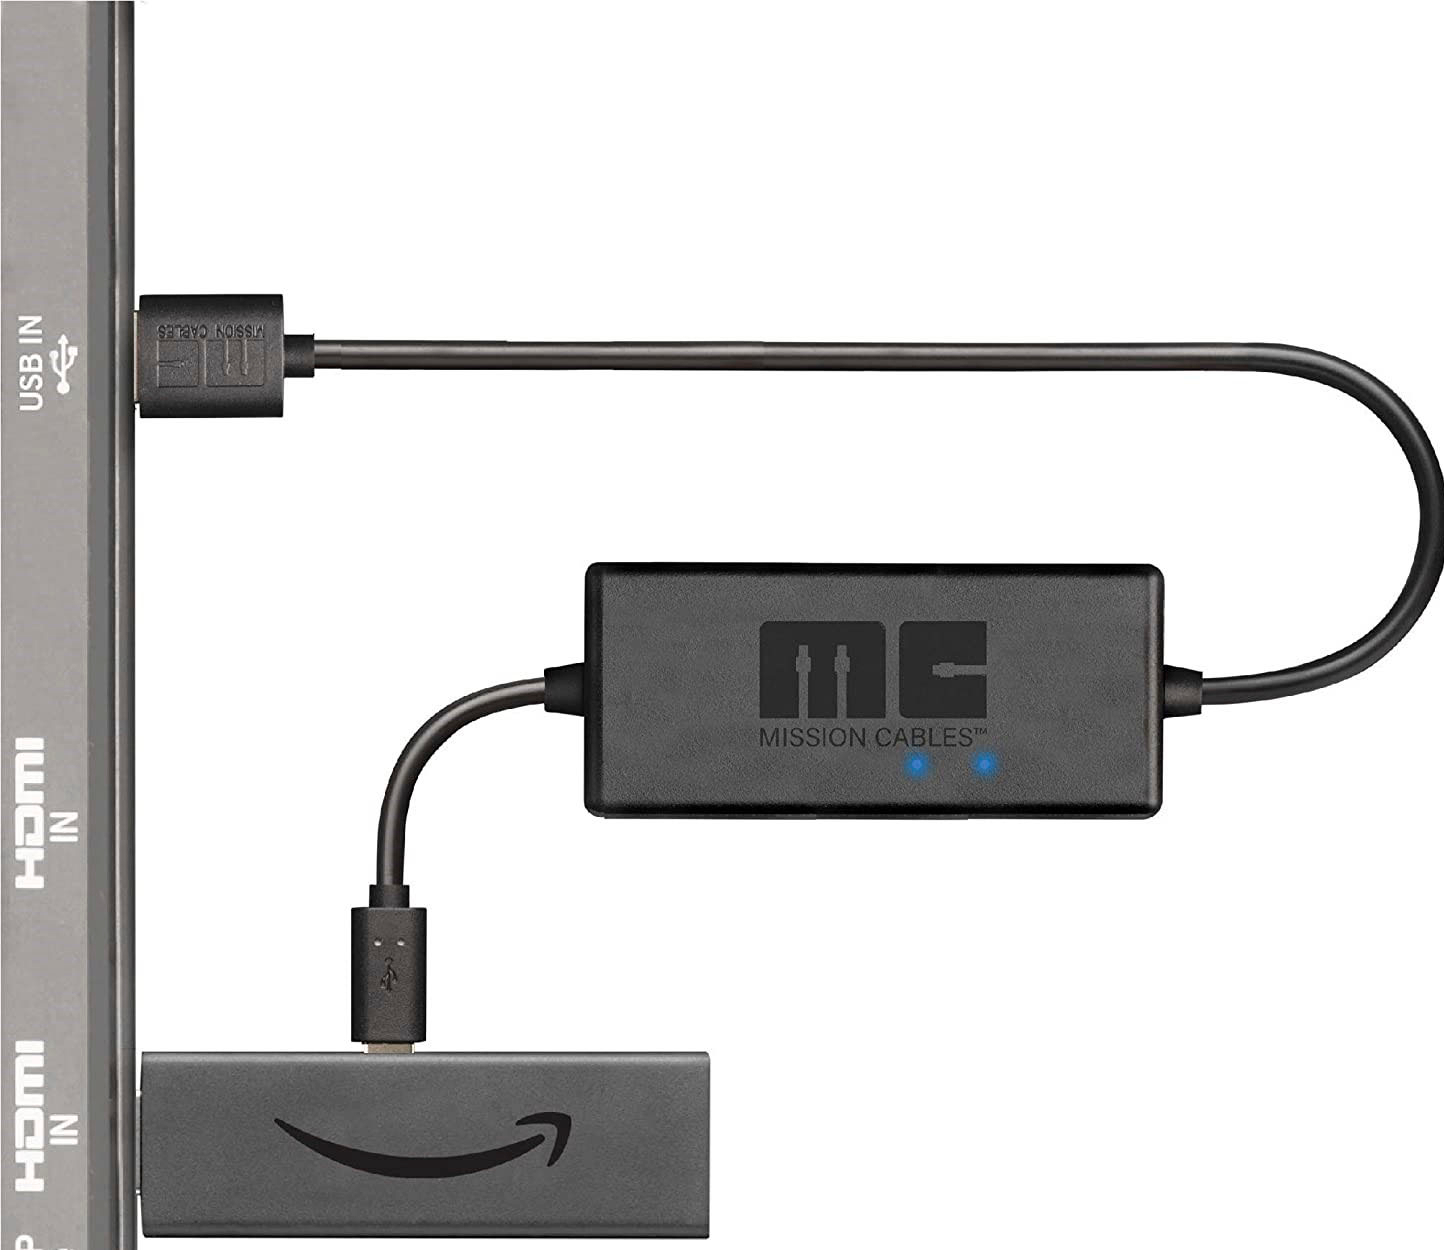  2 in 1 USB Power Adapter and OTG Cable for Fire TV Stick,2nd  Generation USB Power Cable Cord for  Fire Stick.TV's USB port to  power streaming devices（Eliminates The AC Outlet